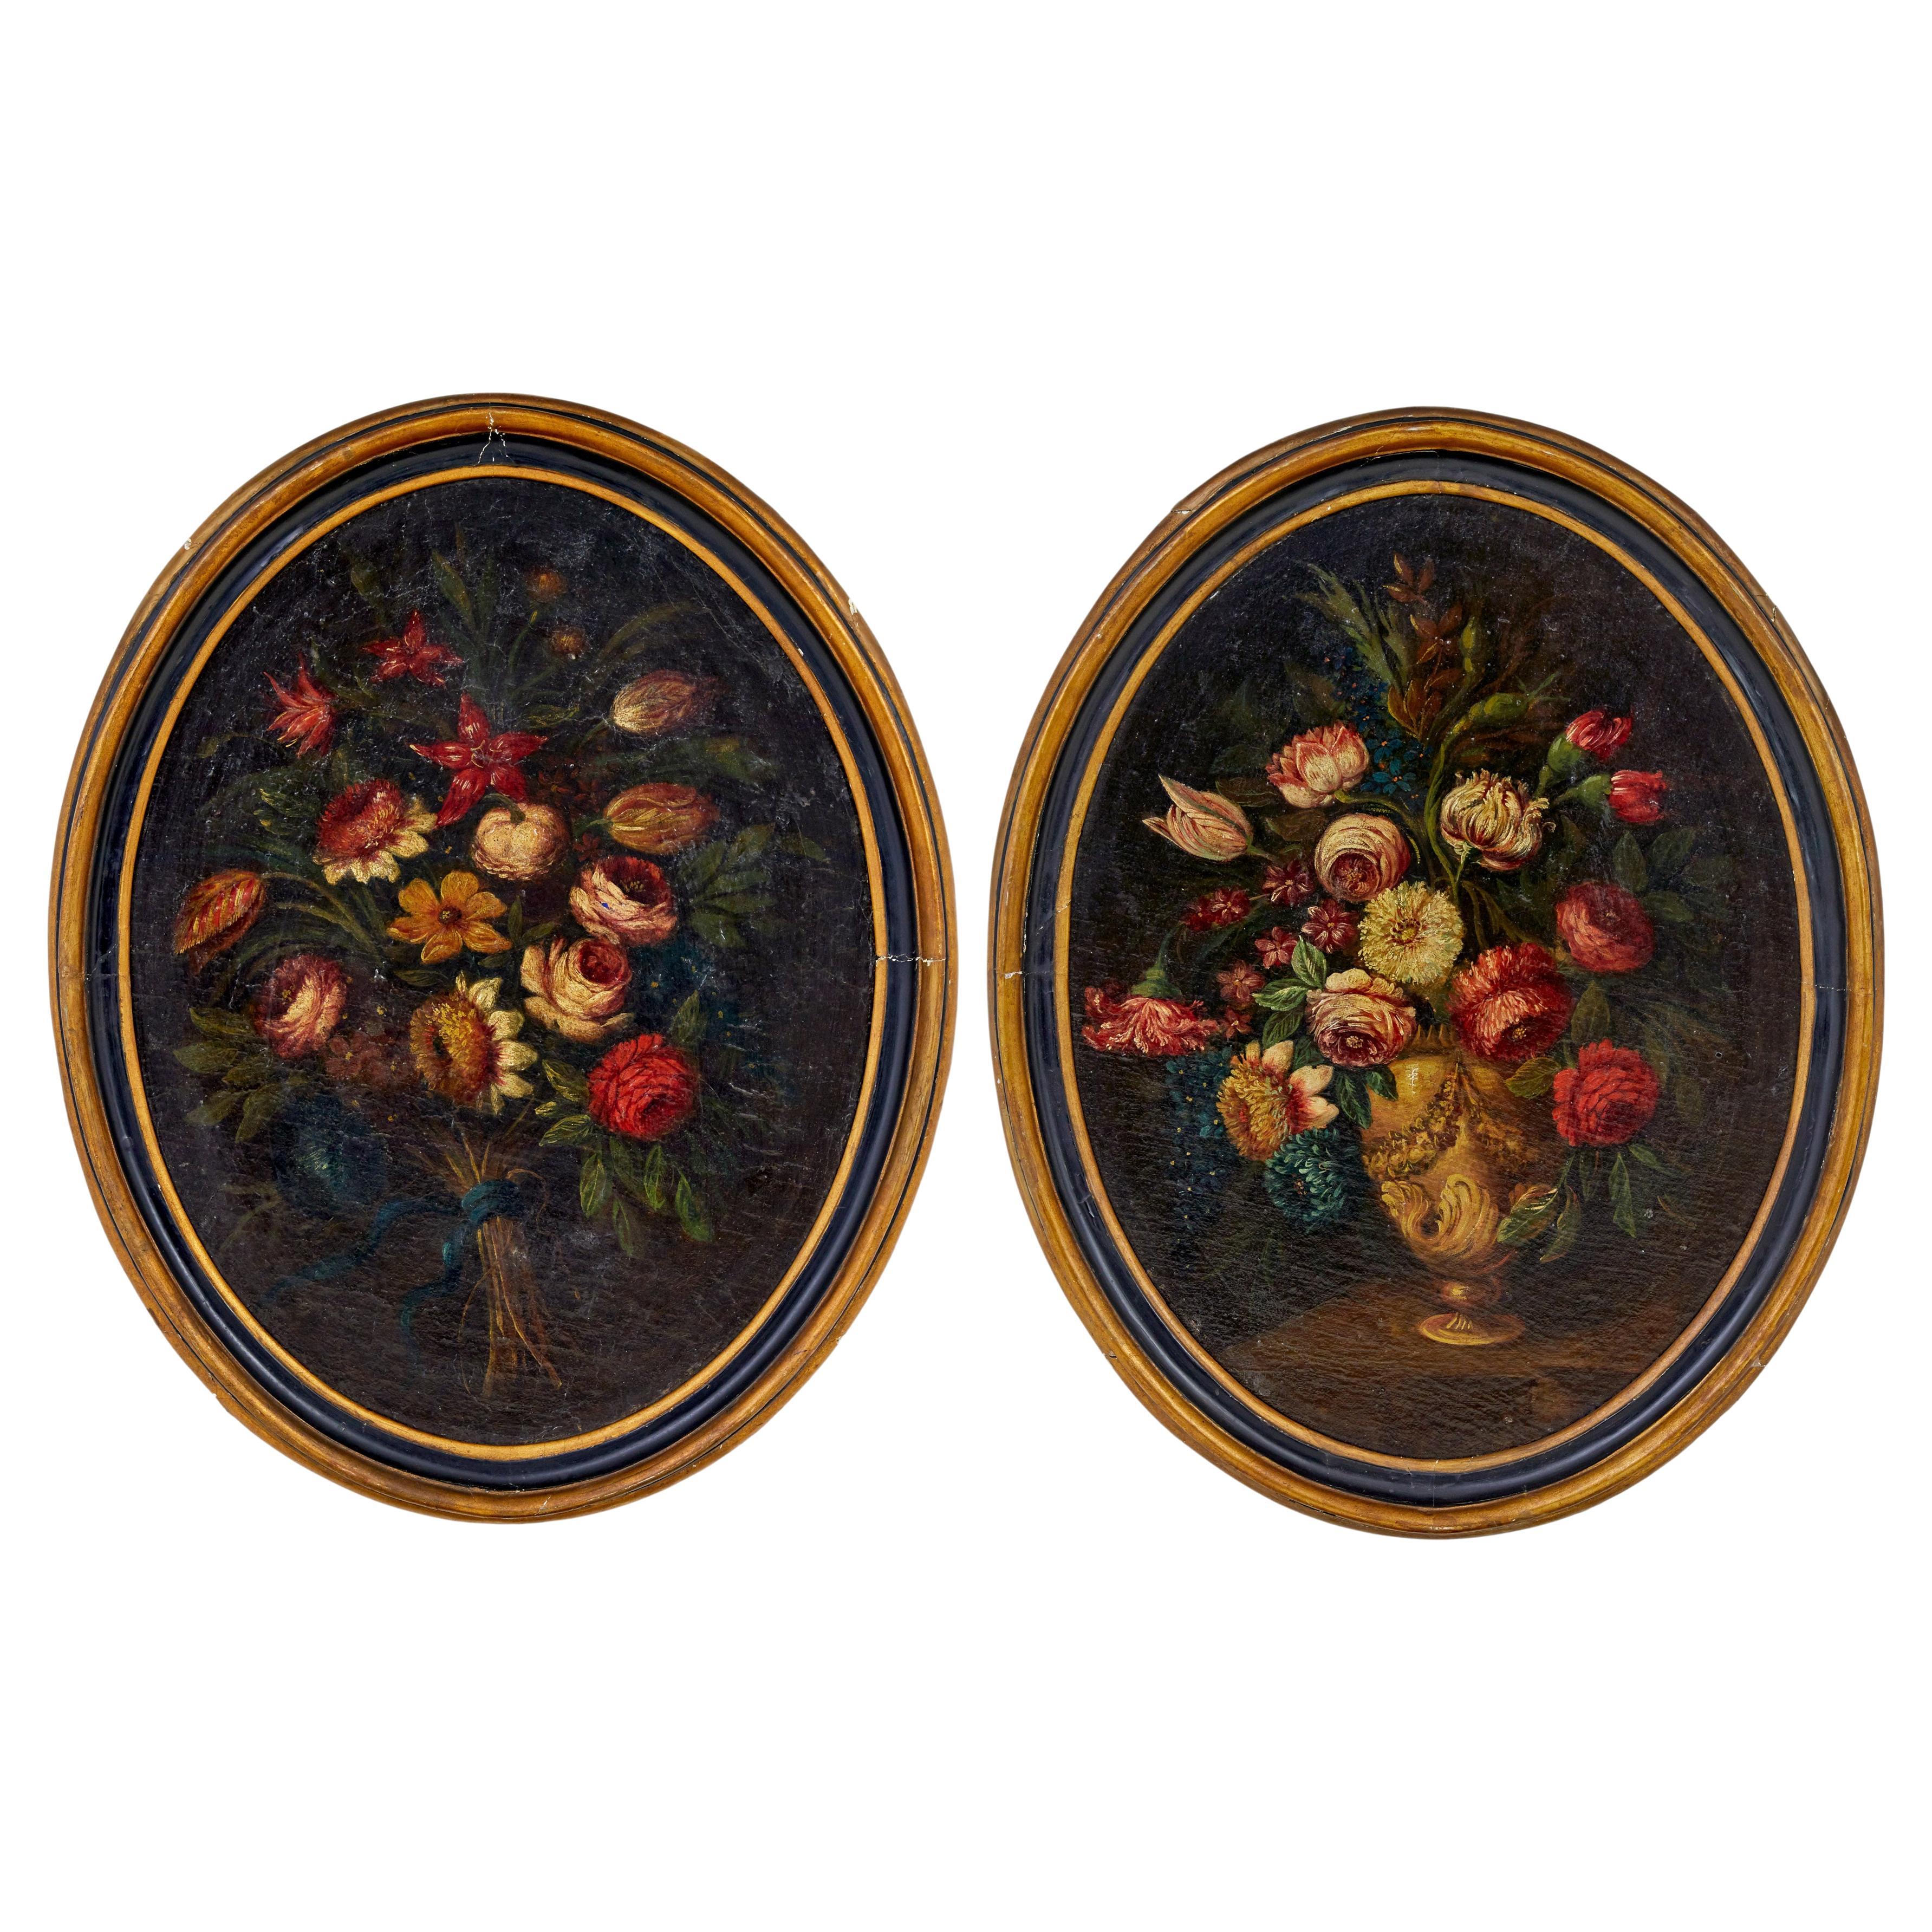 Pair of 18th century oil paintings by Gasparo Lopez still life